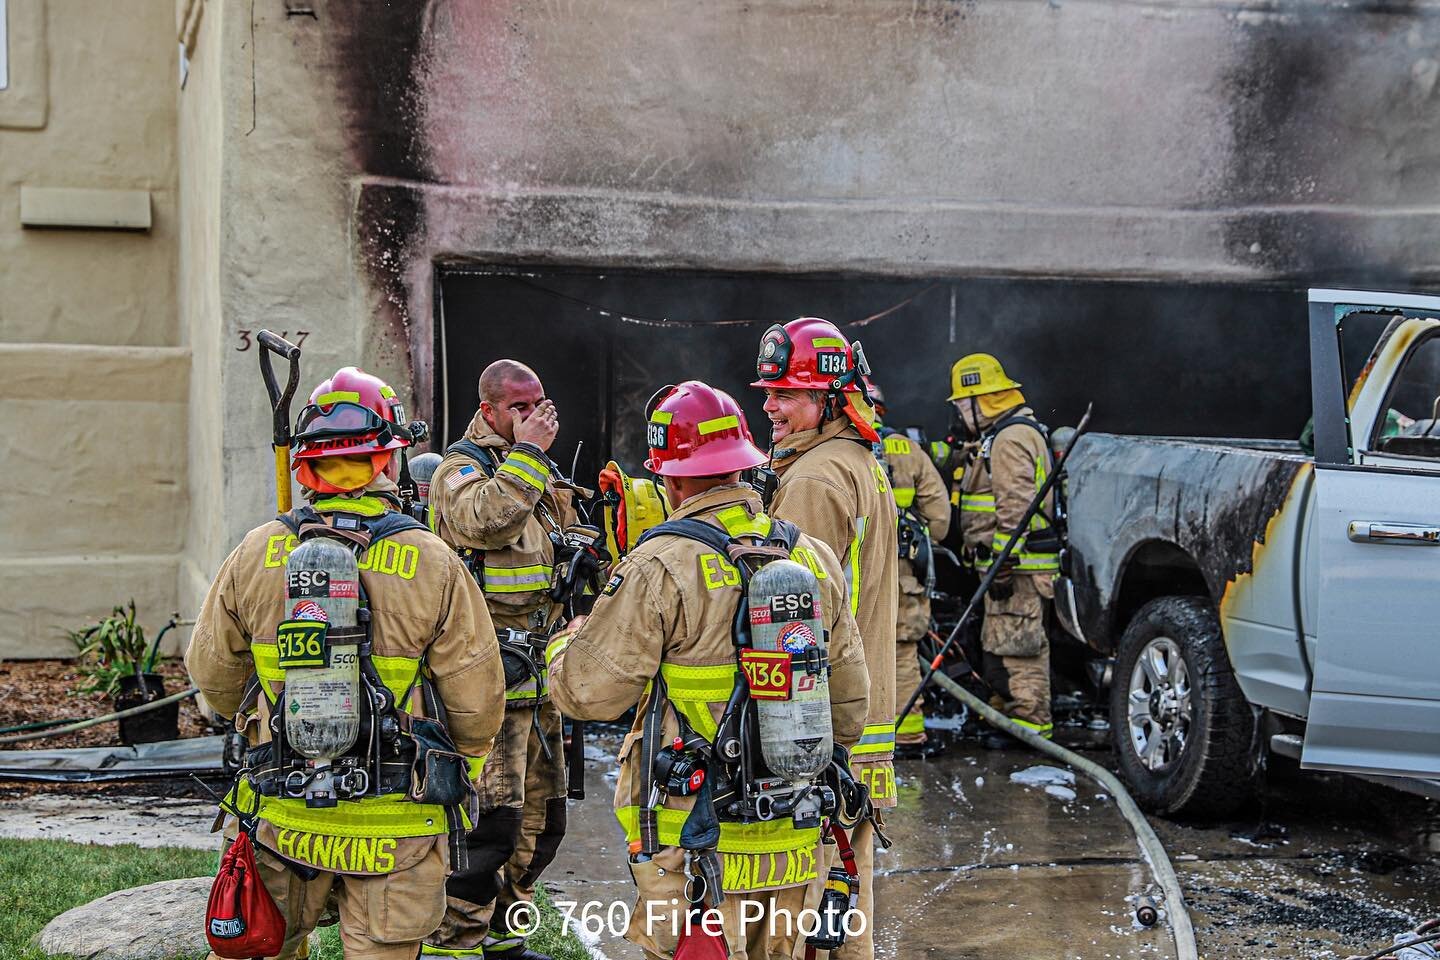 9-11-2020 (&ldquo;Orchid IC&rdquo;)
.
.
The Escondido fire department quickly responded to and extinguished a well involved garage fire on Orchid Glen. The Escondido police department was also on scene to control traffic and keep the area clear for f